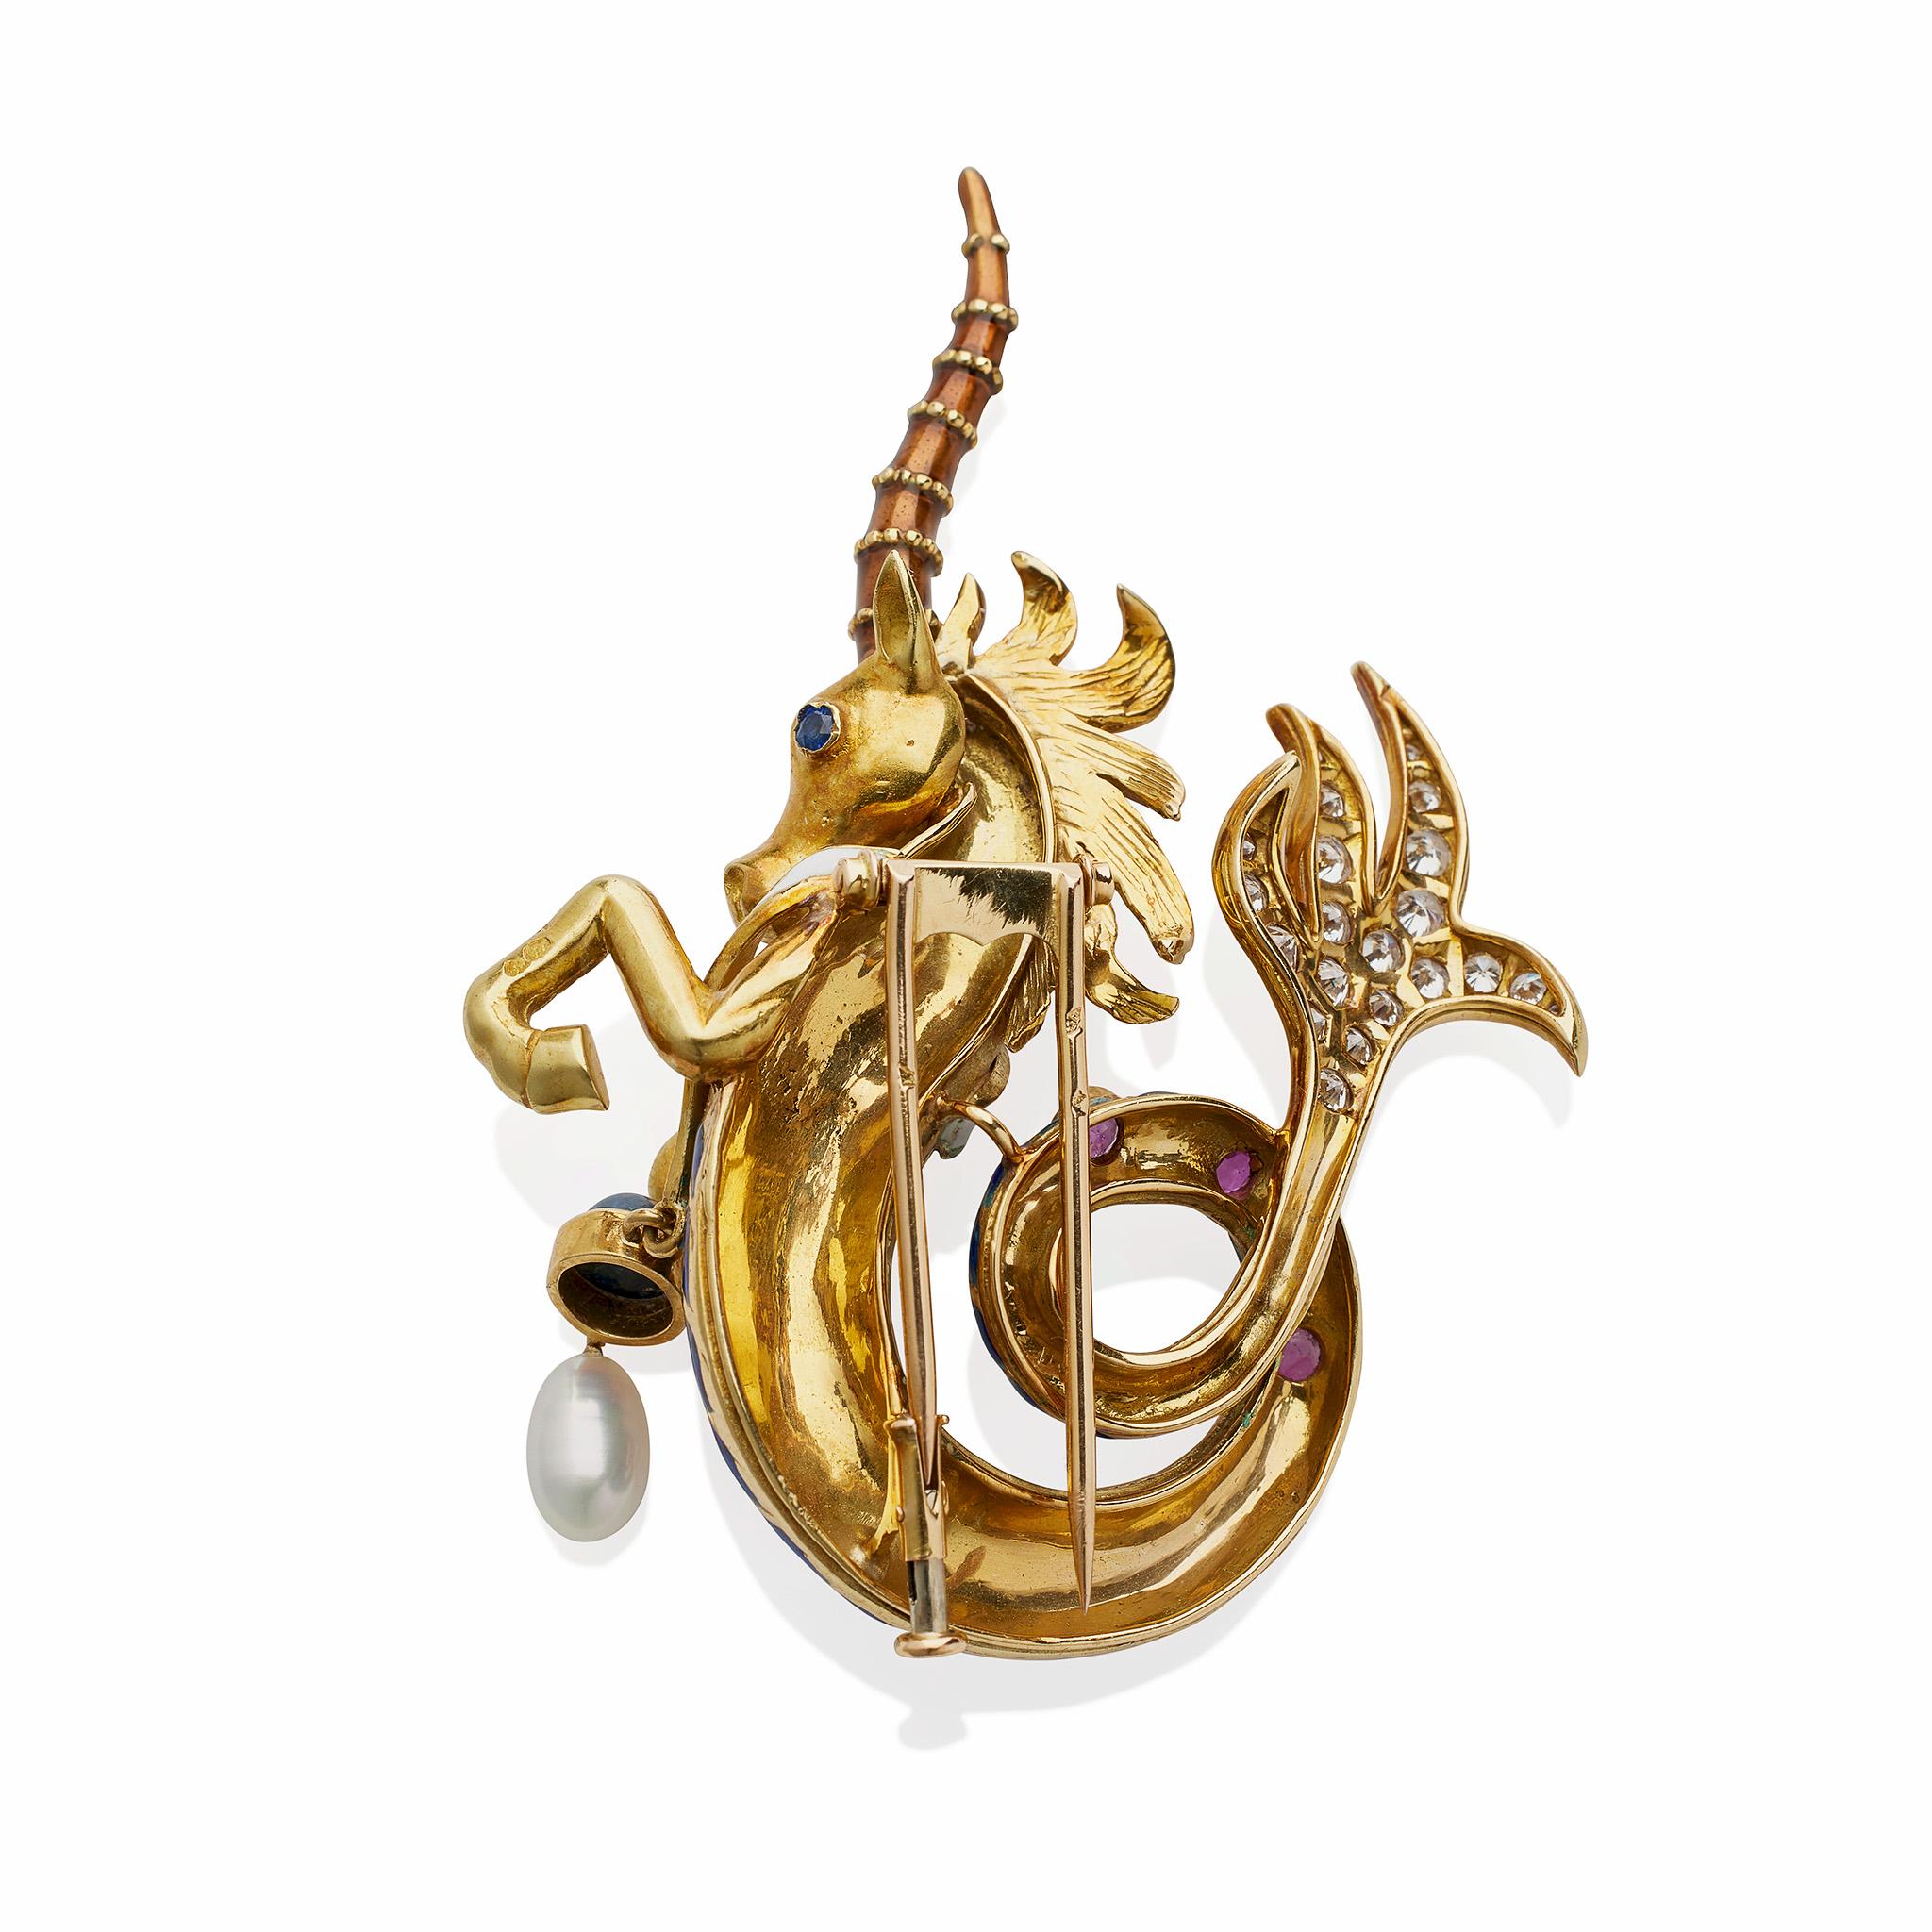 Made by Jean Thierry Bondt, Paris, a creator of jewelry for Van Cleef & Arpels, Lacloche, Cartier, and Mauboussin, among others, this 18K gold and enamel unicorn clip brooch is set with diamonds and colored stones. The highly three dimensional sea